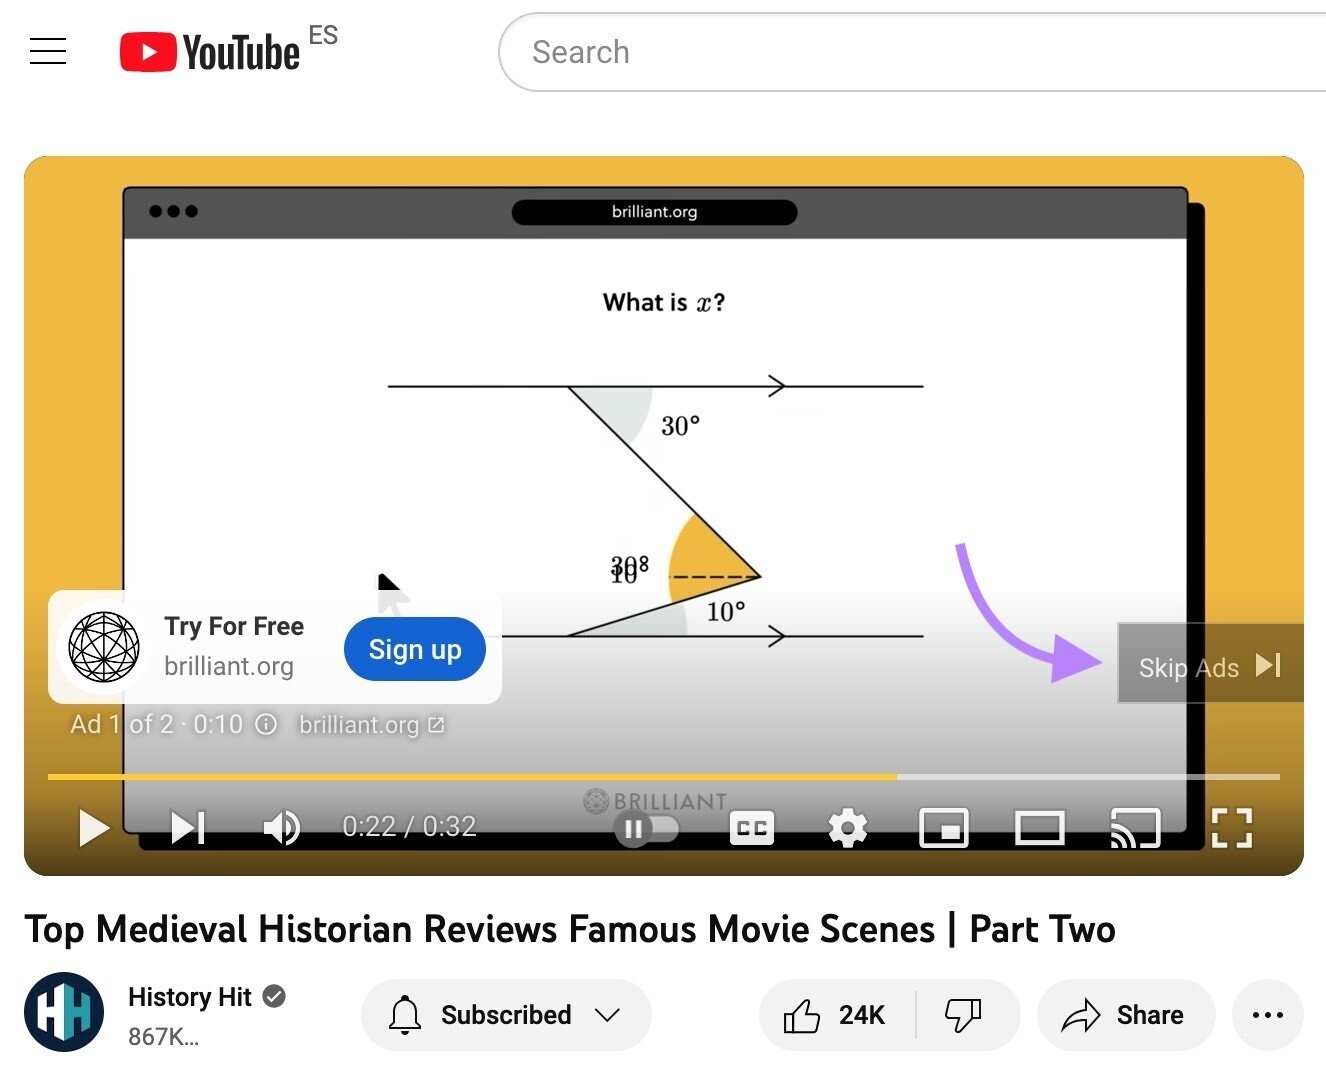 An in-stream skippable ad on YouTube